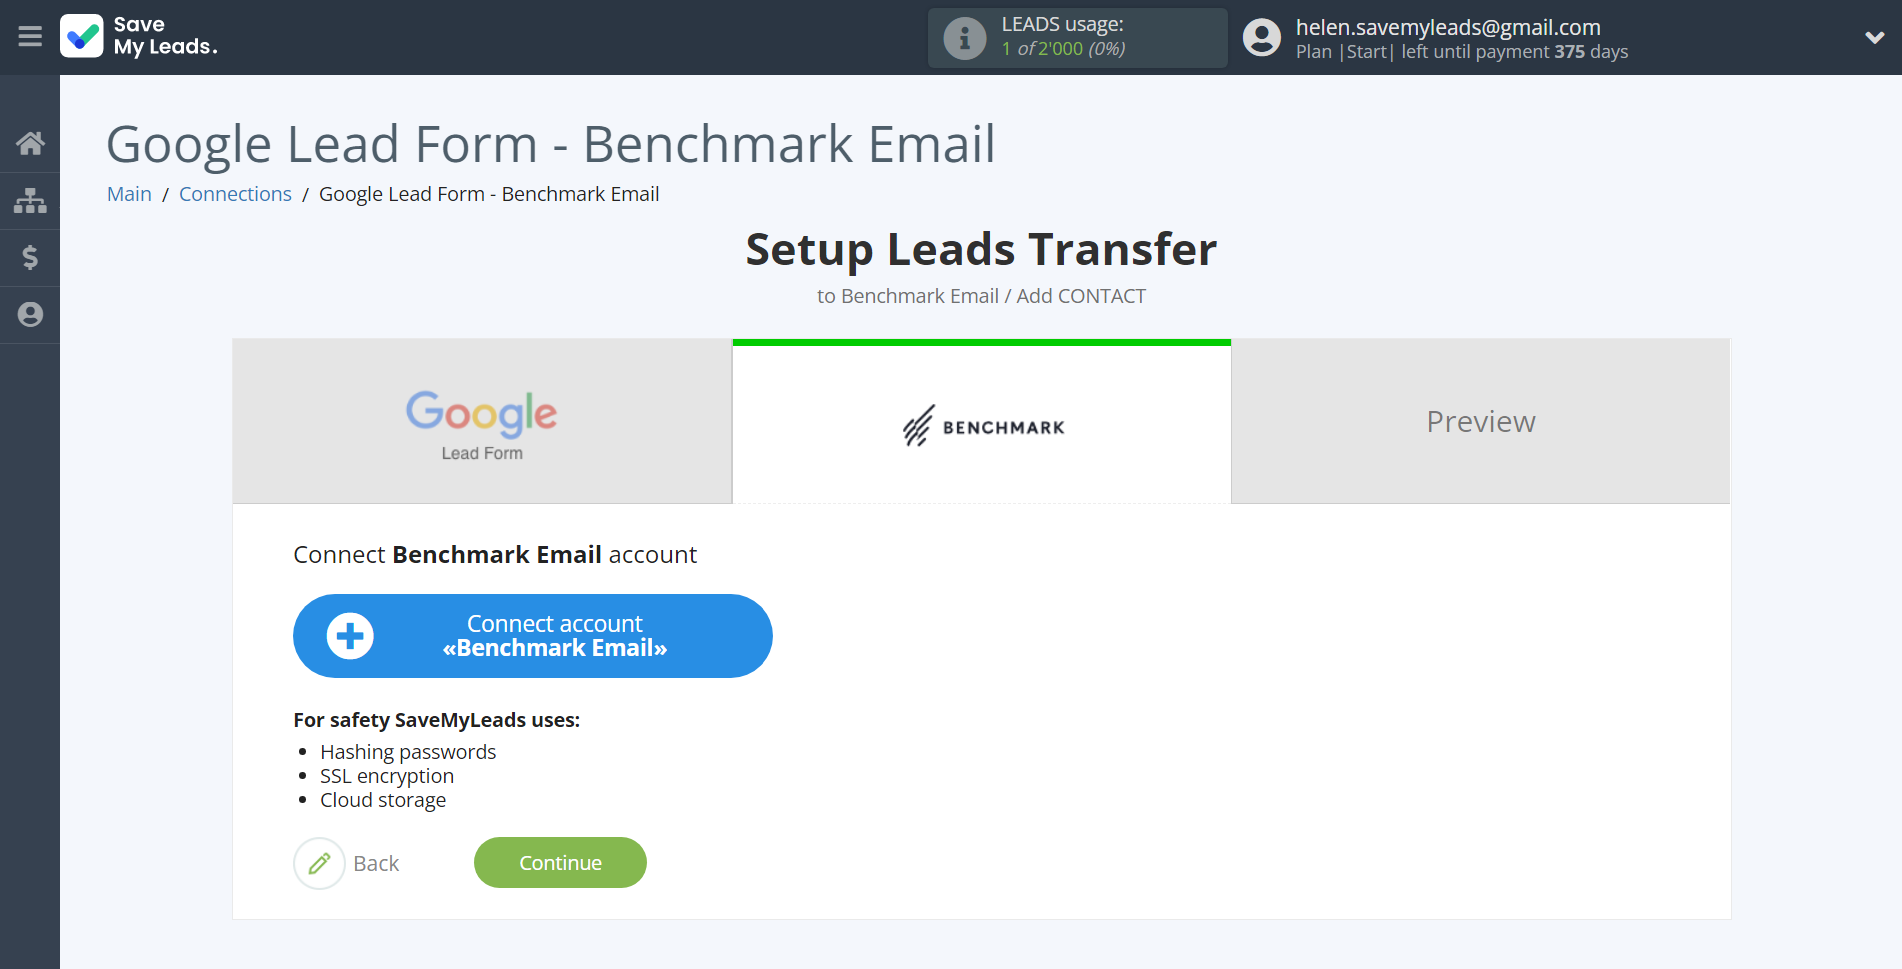 How to Connect Google Lead Form with Benchmark Email | Data Destination account connection